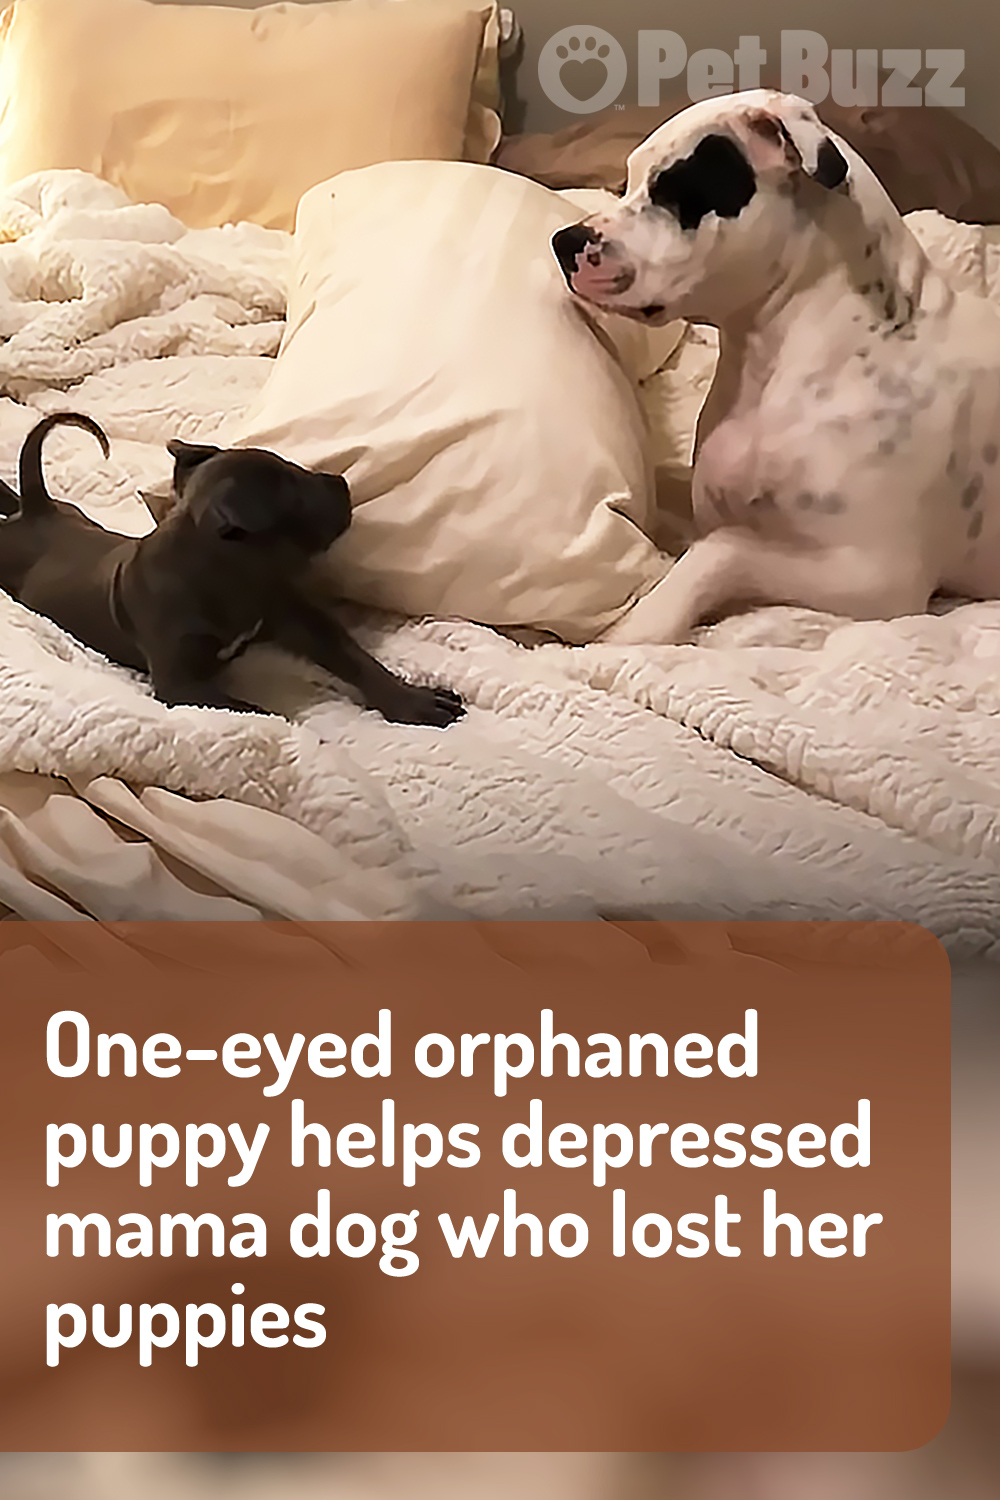 One-eyed orphaned puppy helps depressed mama dog who lost her puppies